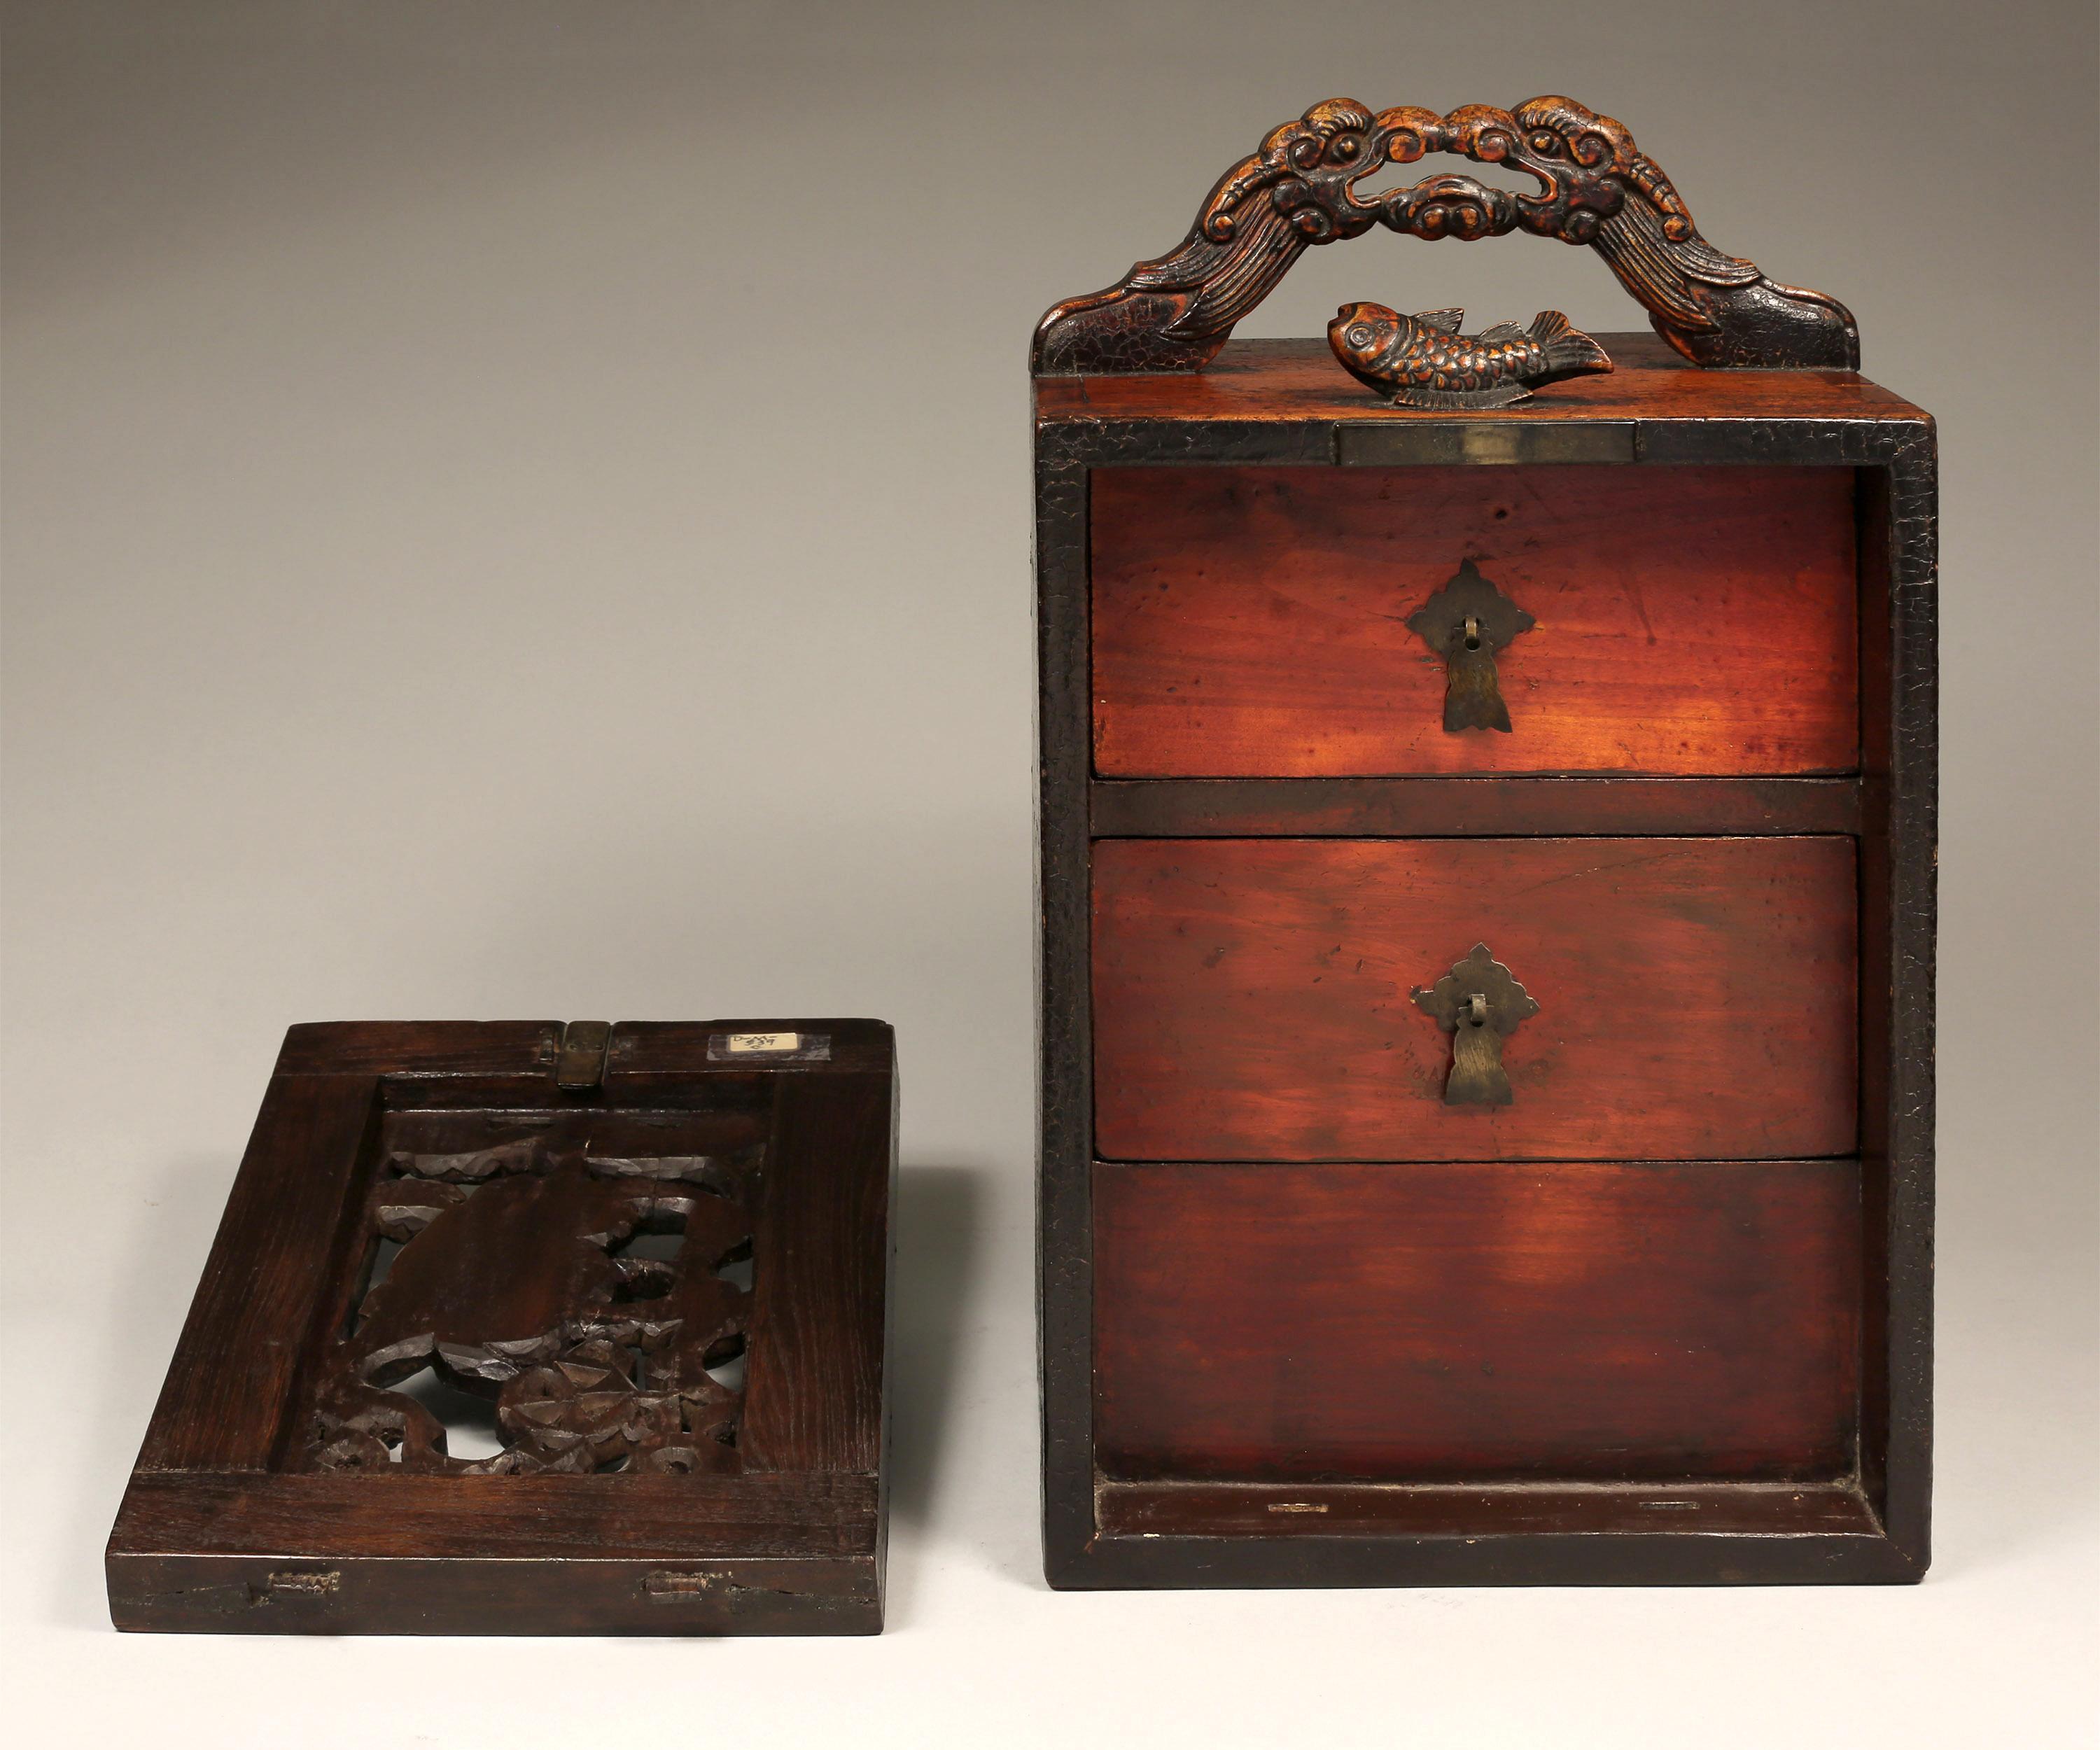 High official's box for his seals (chops) from China.
Qing Dynasty (18th/19th century)
It is decorated with carved dragon handle, a fish and a Fu dog surrounded floral motifs. 
Measures: W: 10 in x H: 19 in x D: 8.5 in.
    